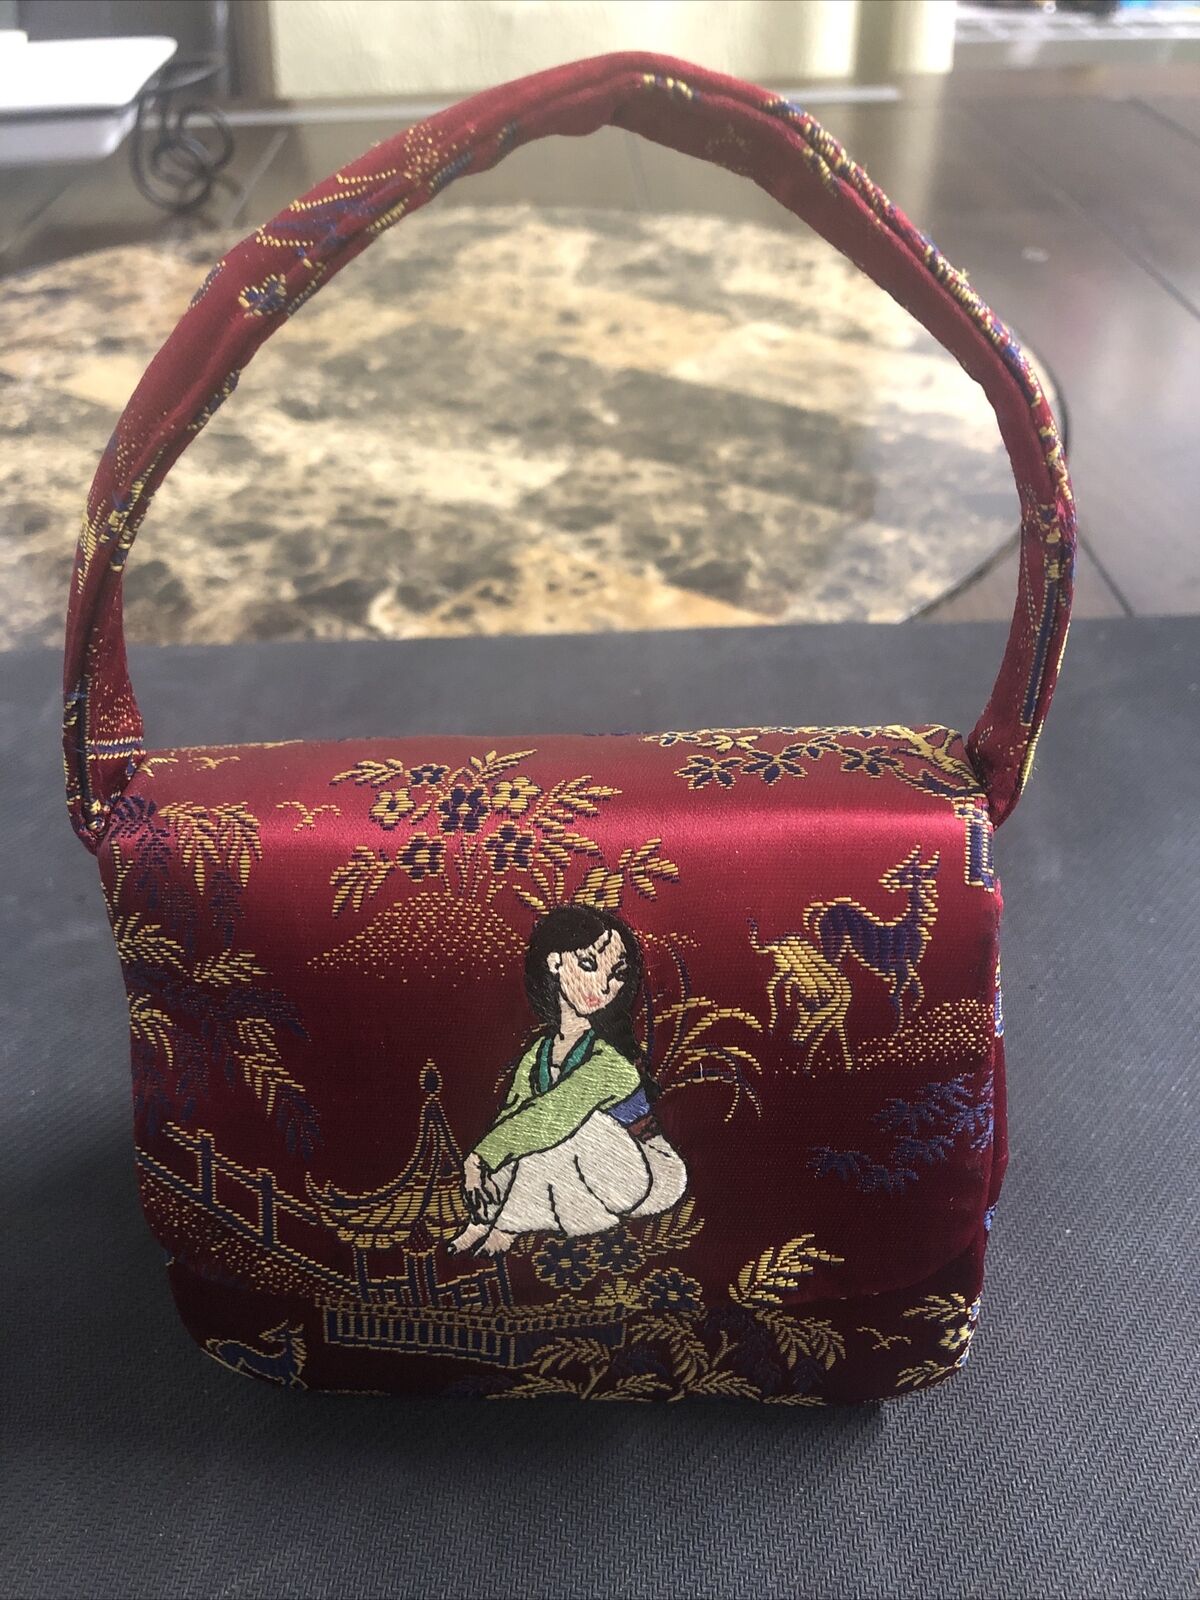 Mulan Kids 4.5” Purse Disney Store Embroidered Official Preowned